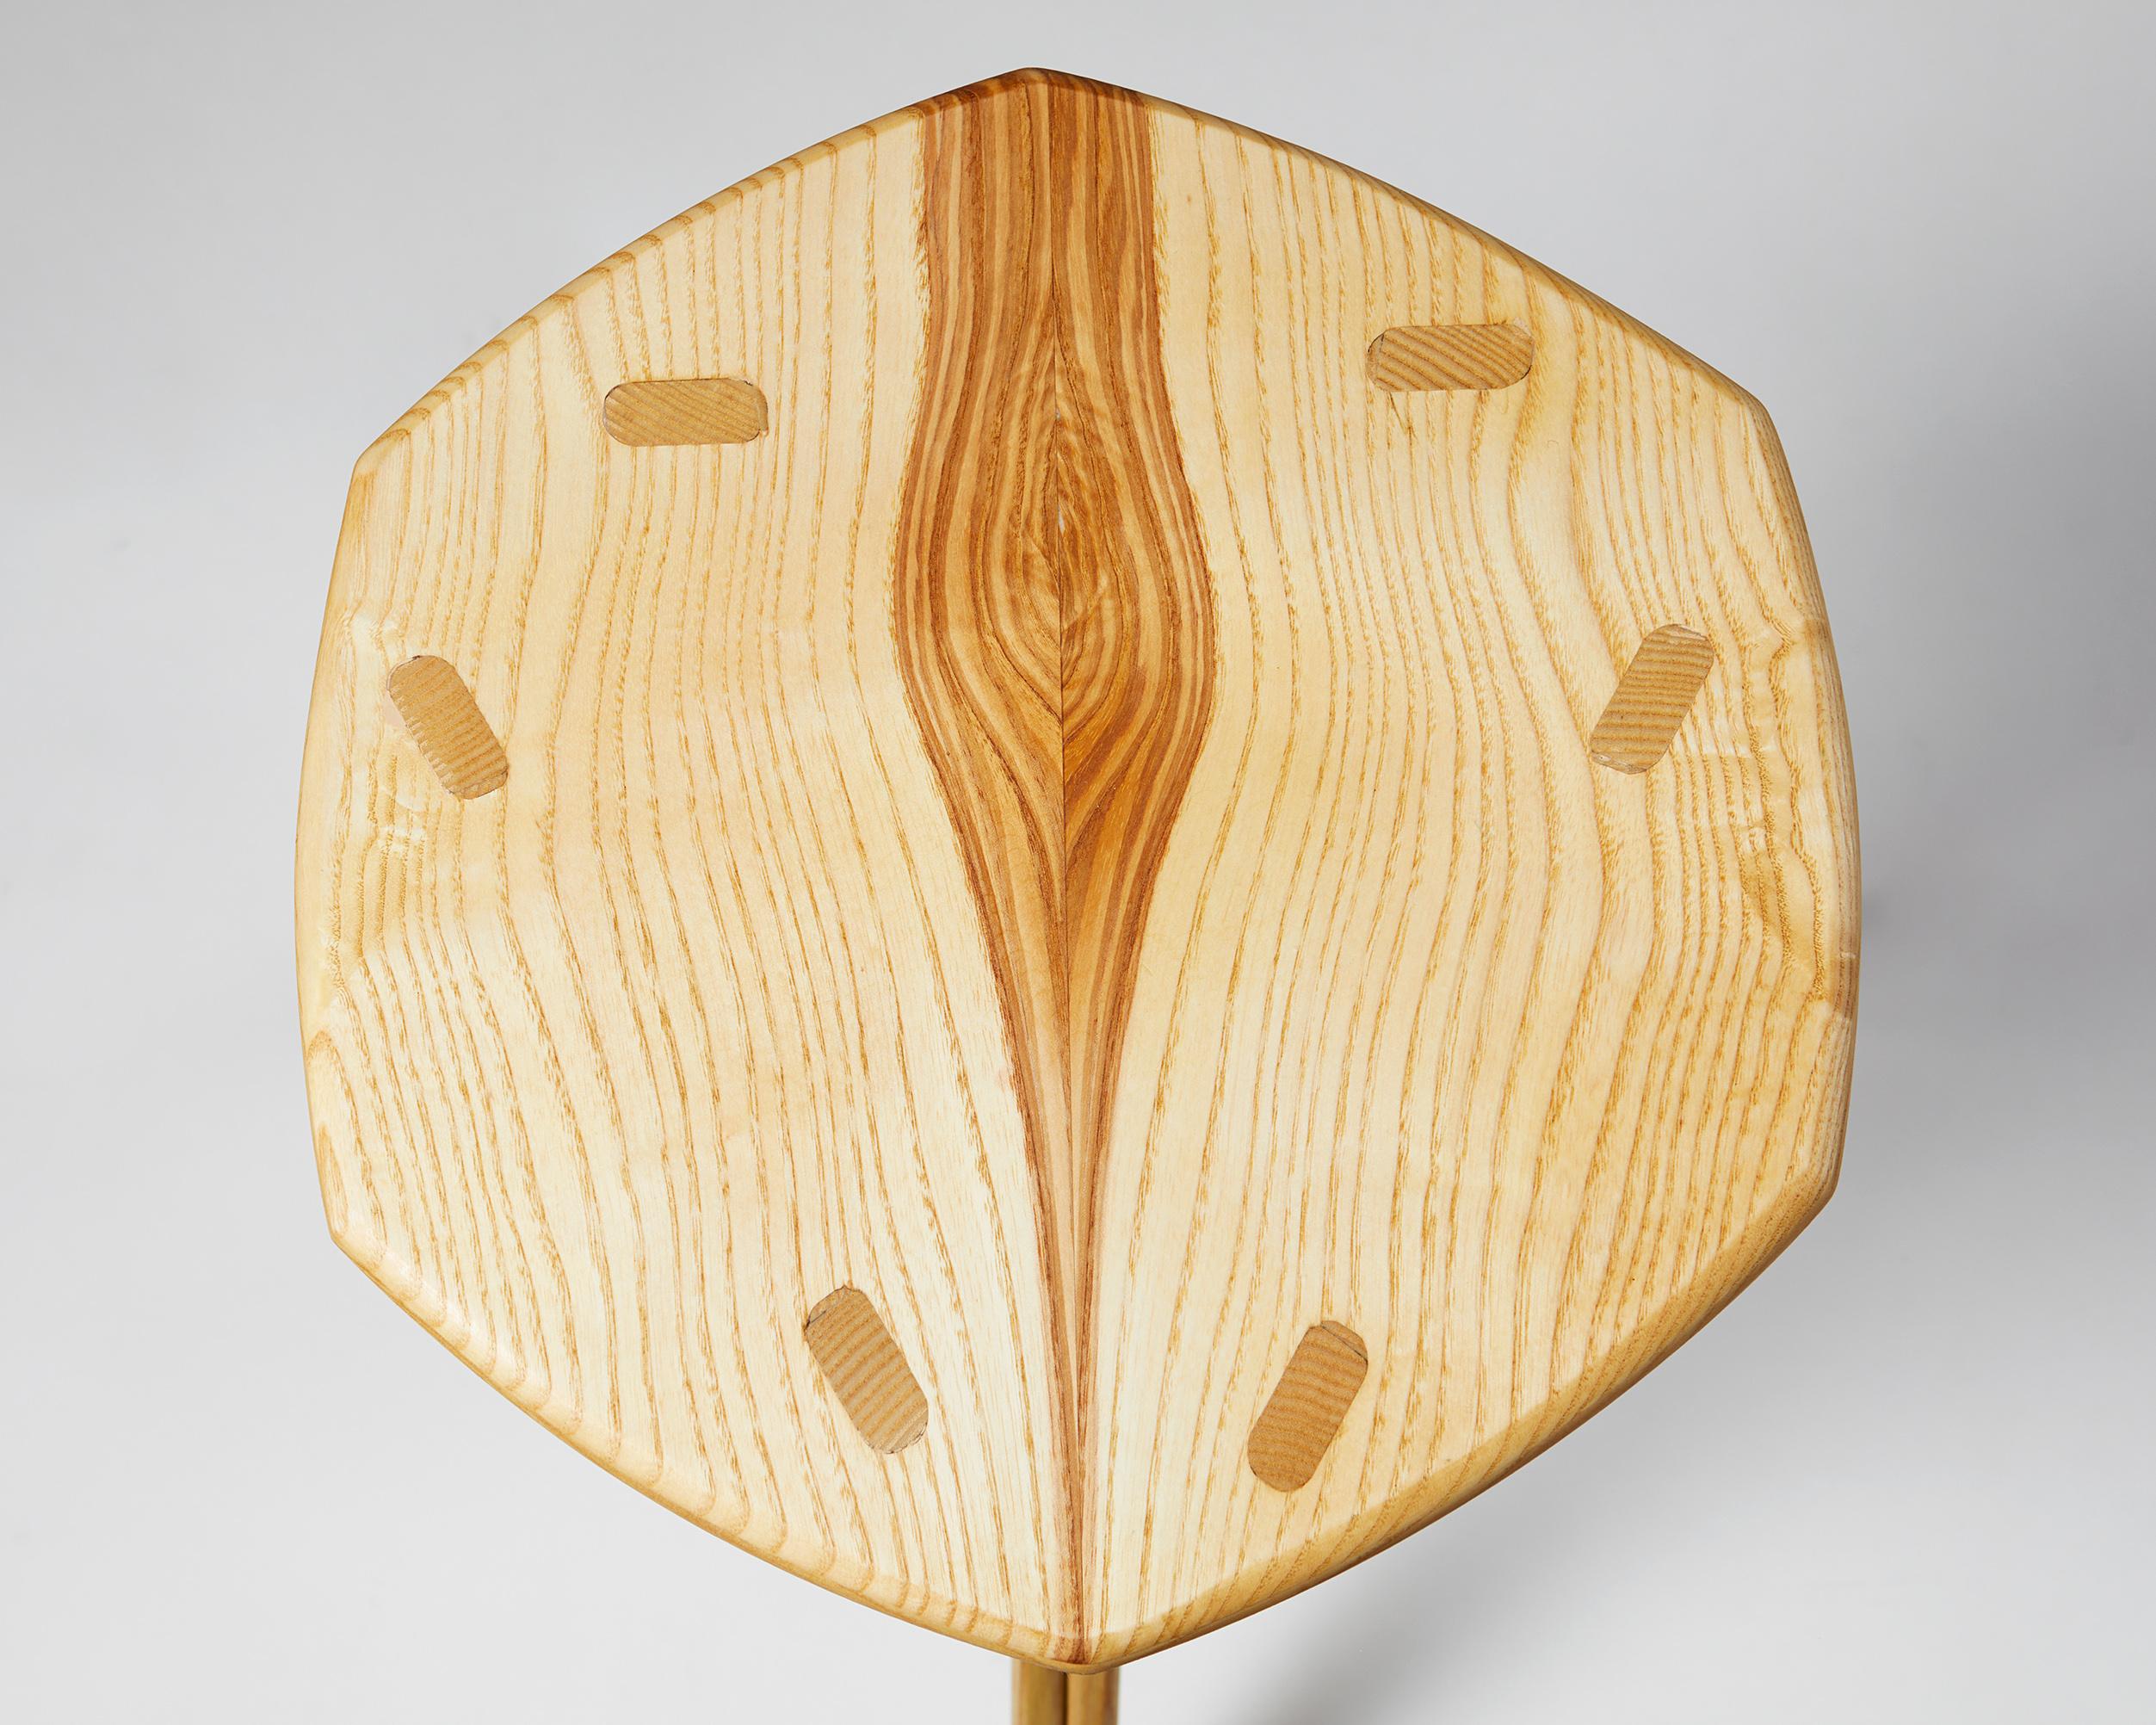 Stool Designed by Calle Warfvinge, Sweden, Contemporary In Good Condition For Sale In Stockholm, SE